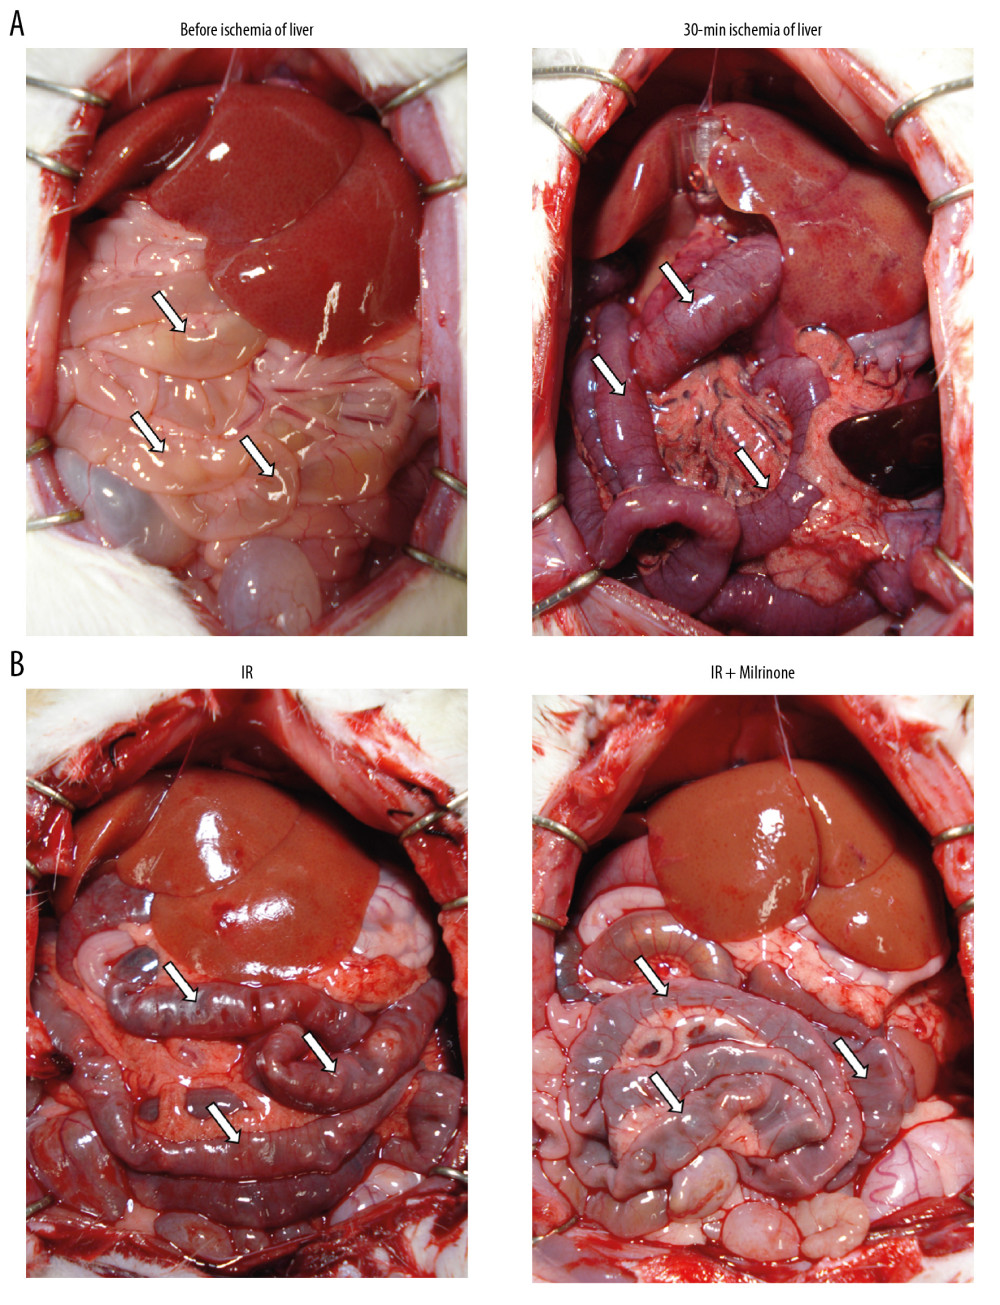 Macroscopic findings: Before ischemia of the liver, both the liver and small intestine showed no abnormalities. After 30 min of ischemia of the liver, the liver surfaces appeared ischemic and the small intestines became distended, congested, and dark red (A). Five hours after reperfusion, the liver surfaces of the ischemia–reperfusion (IR) and IR+milrinone groups appeared brown and slightly congested. The small intestines of the IR group remained congested and slightly distended. These findings in the small intestines were attenuated in the IR+milrinone group (B). White arrows, small intestine.